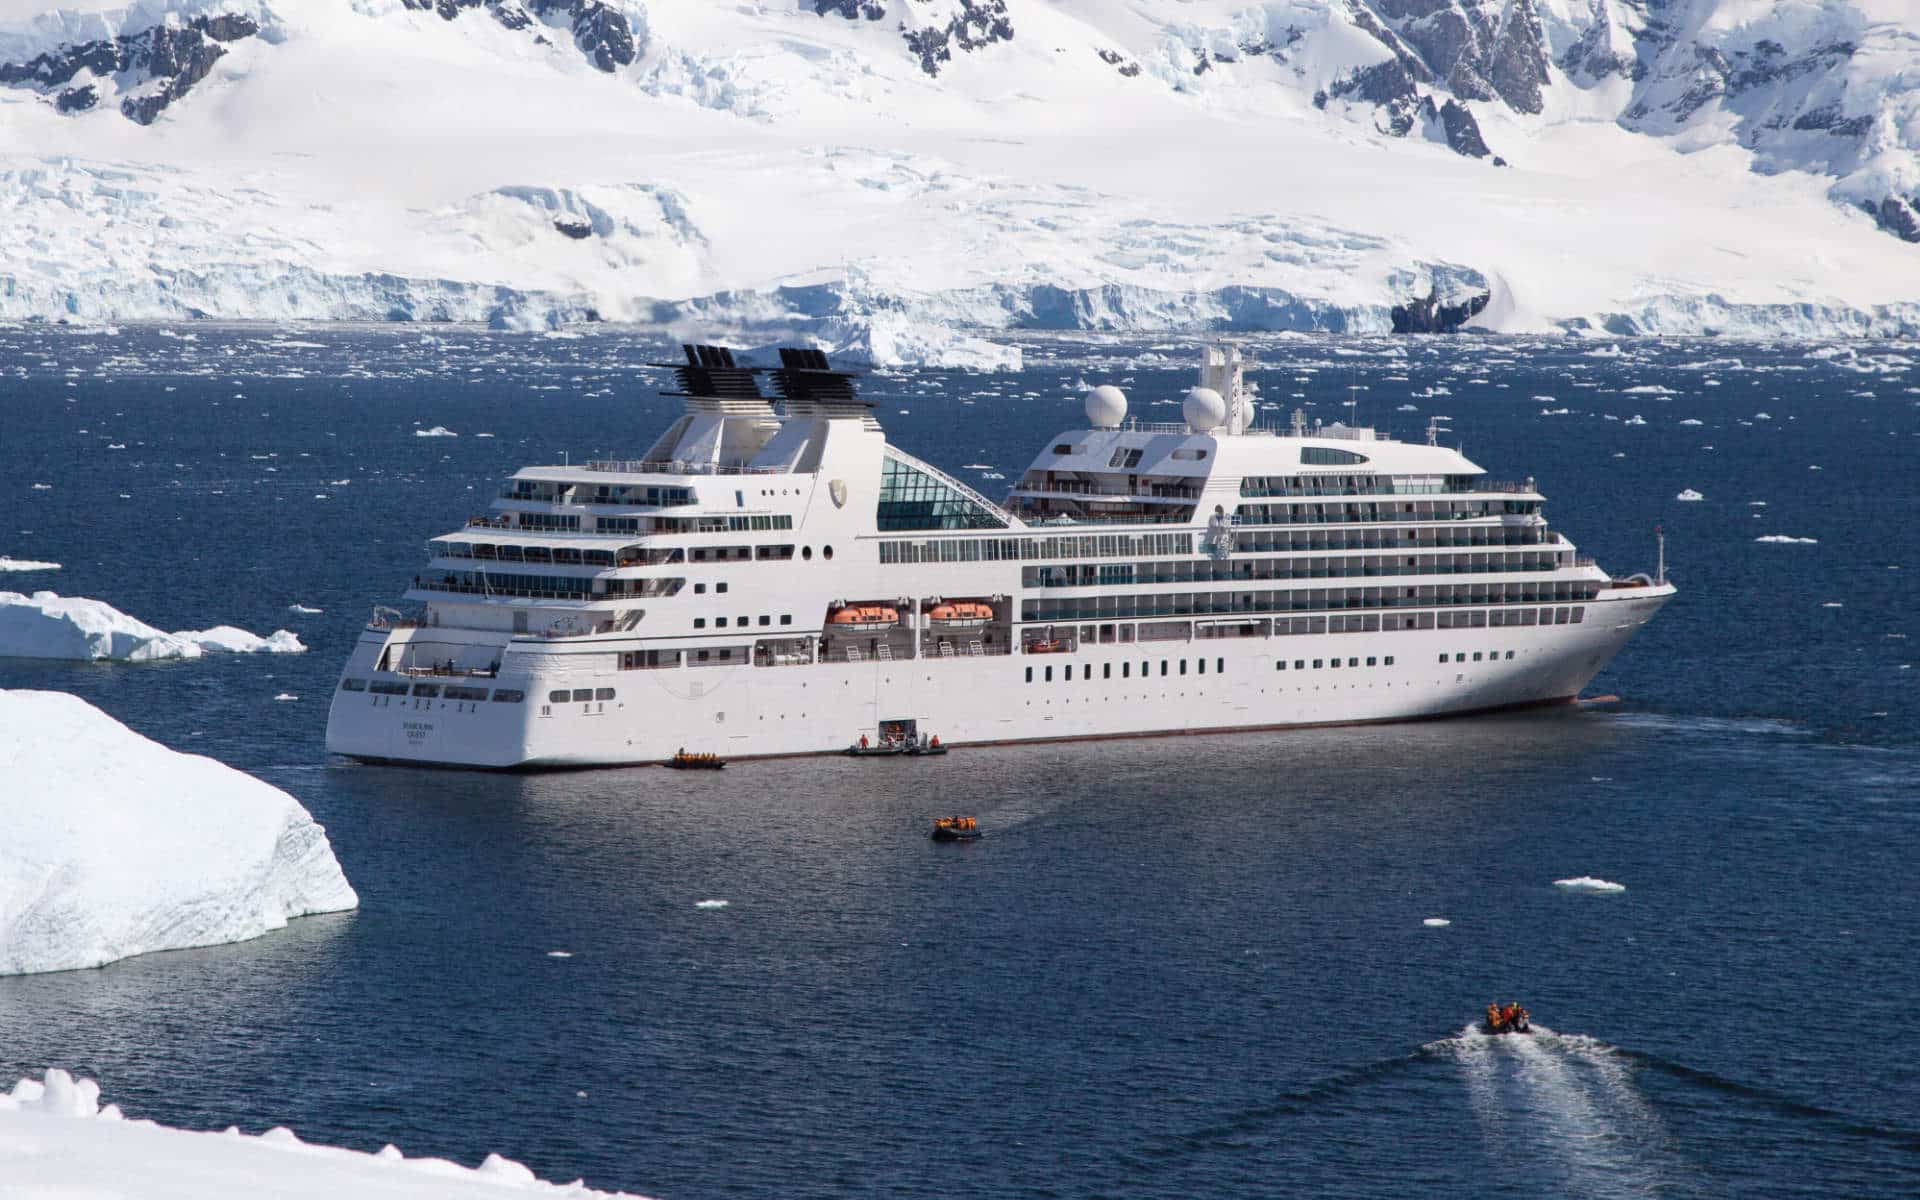 The Seabourn Quest Antarctica season in 2021 has been cancelled.